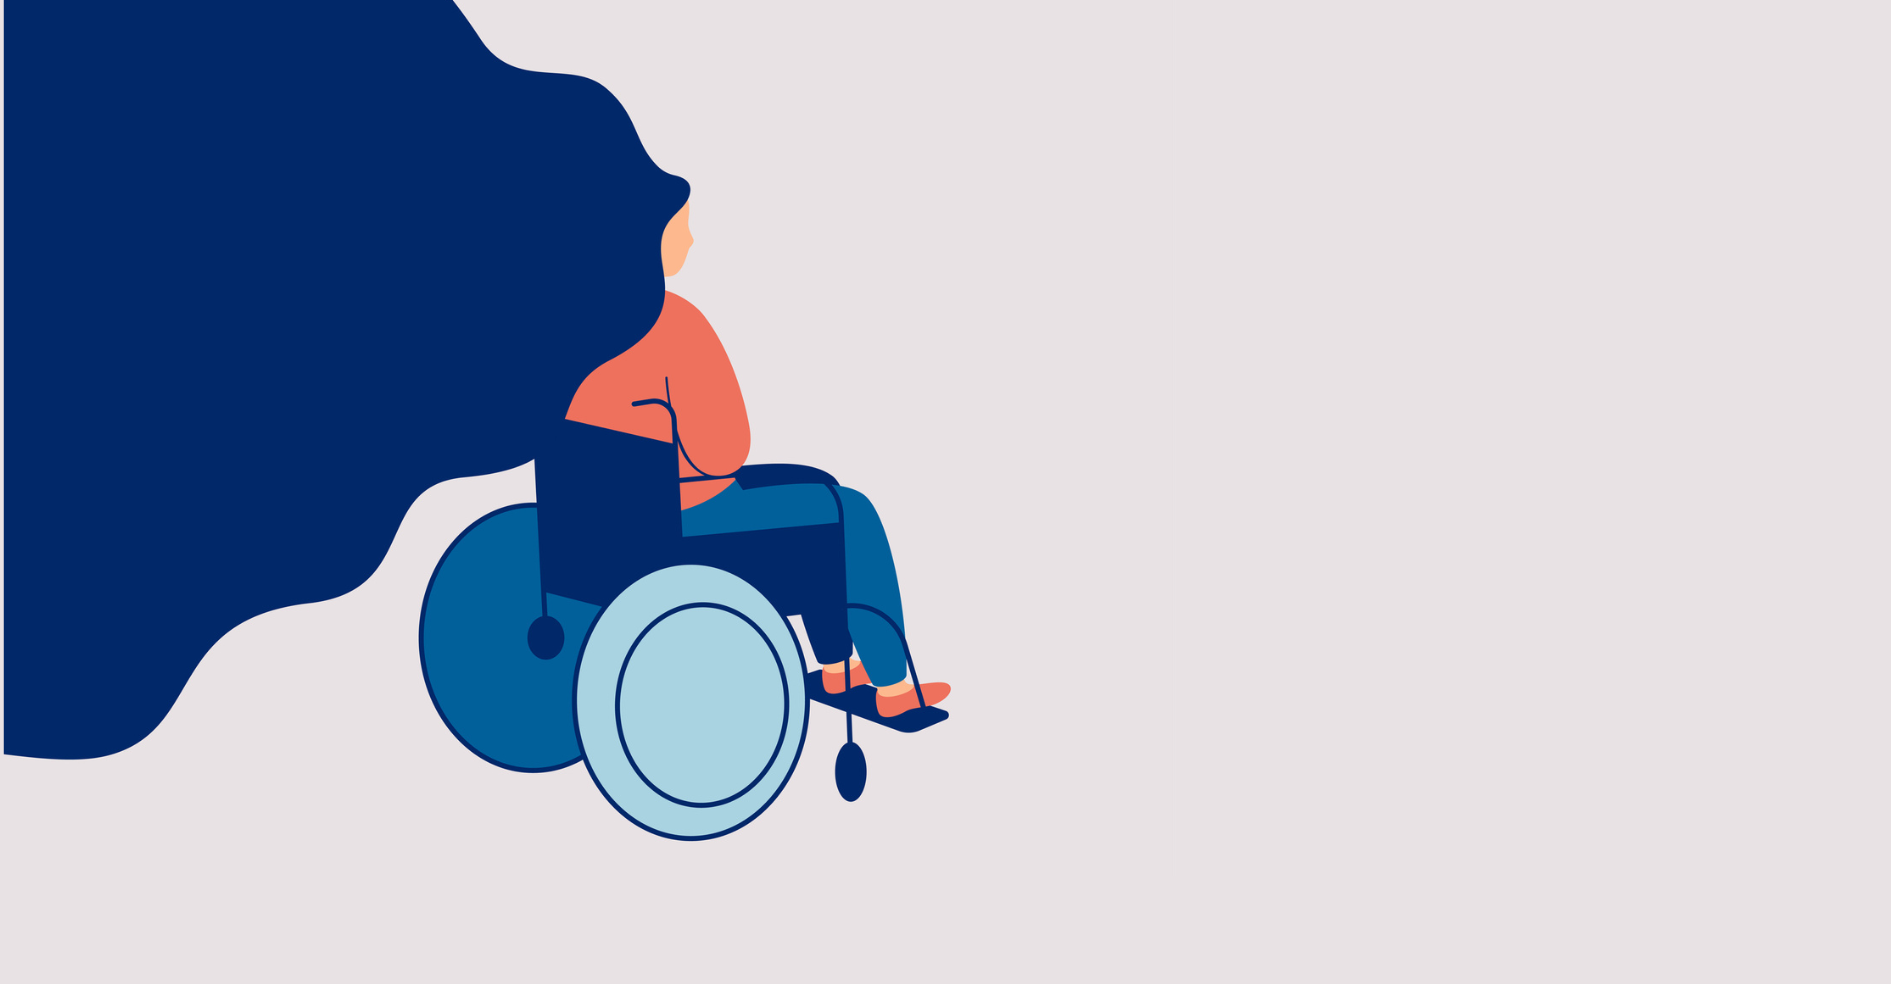 Addressing Sexual Assault against People with a Disability